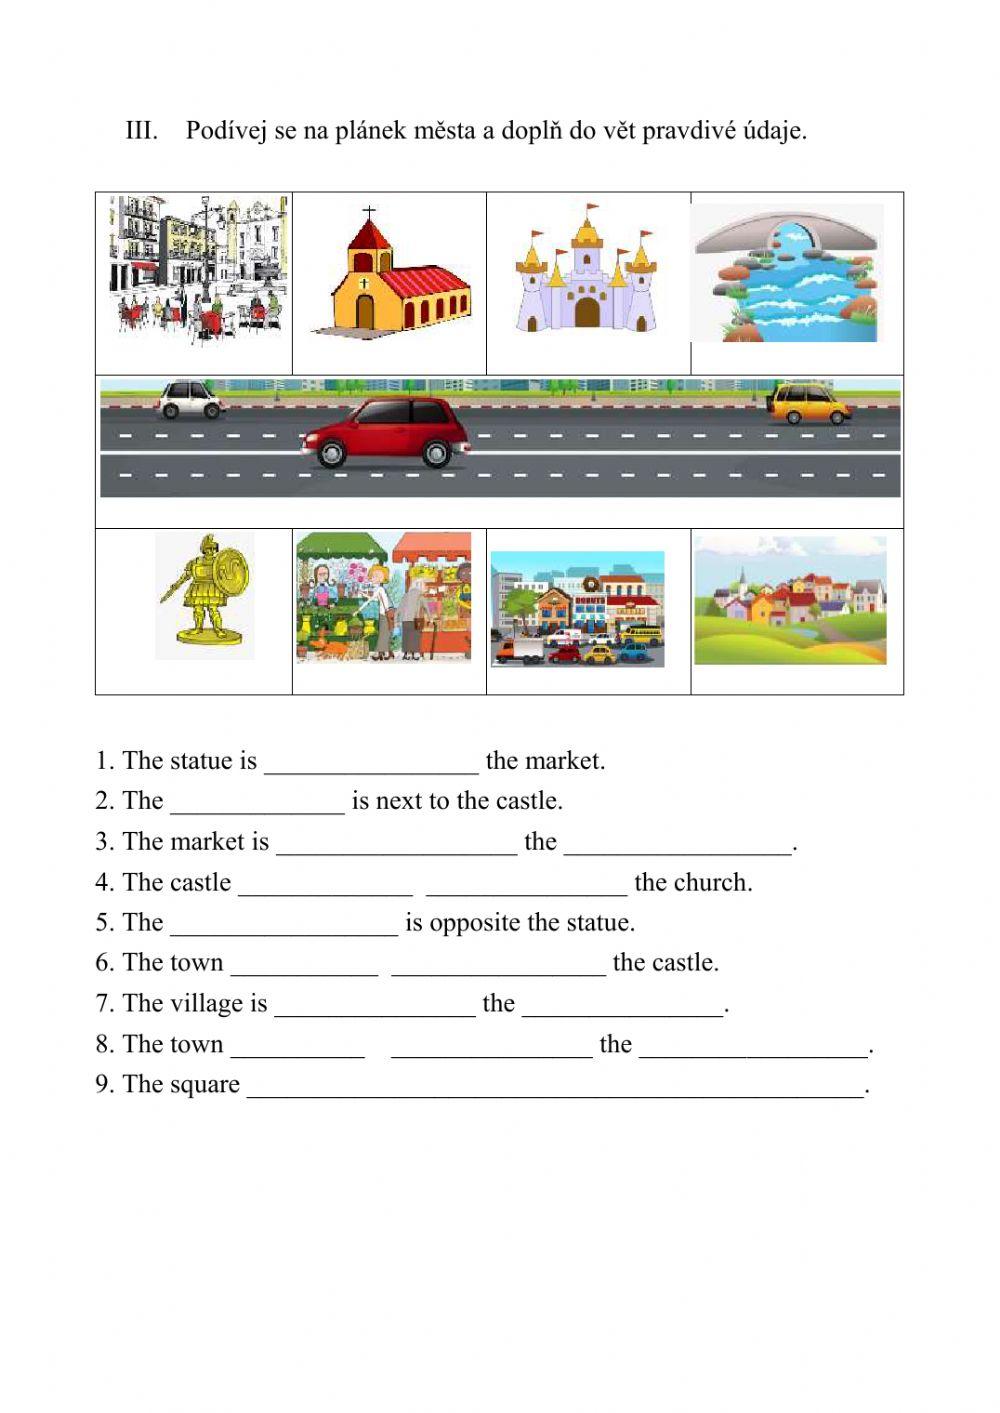 Chit chat 2, Unit 4 - Town vocabulary practice